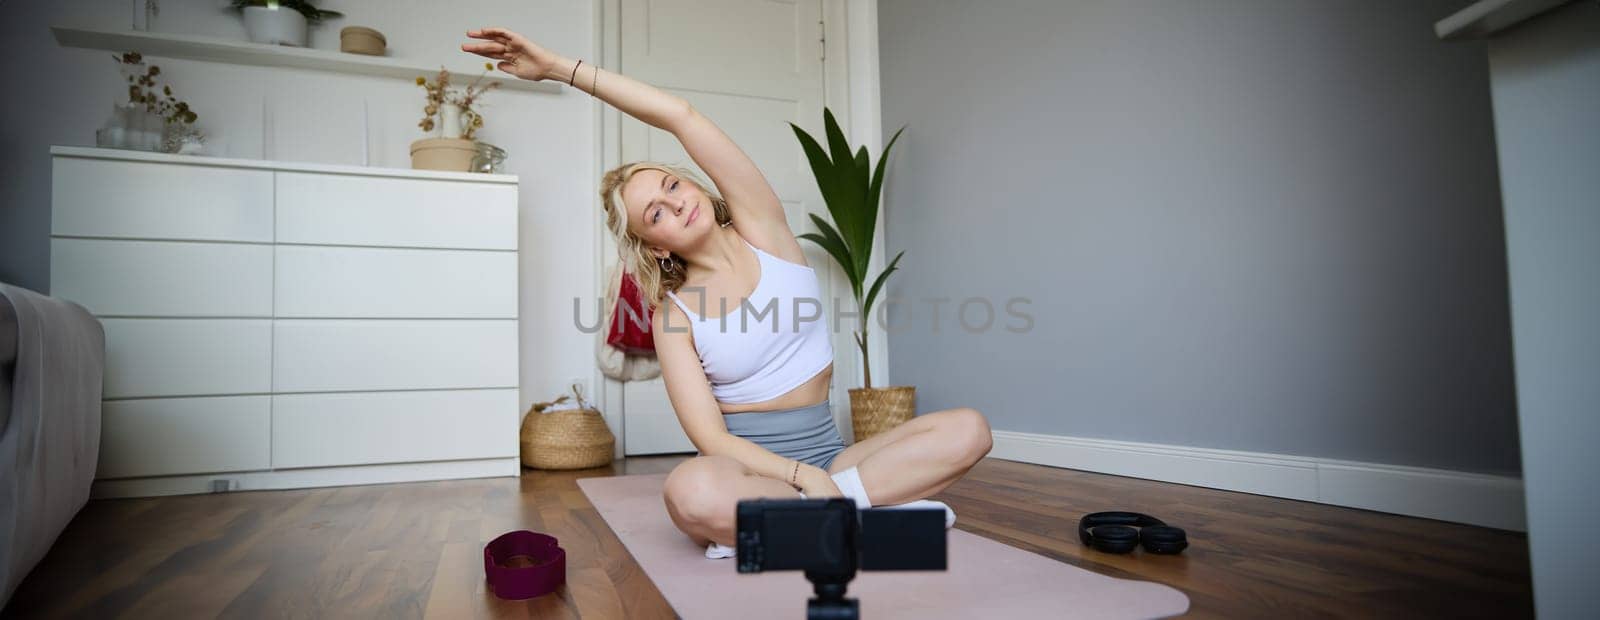 Portrait of young blogger, yoga content creator, showing exercises, recording video of herself working out at home on rubber mat.